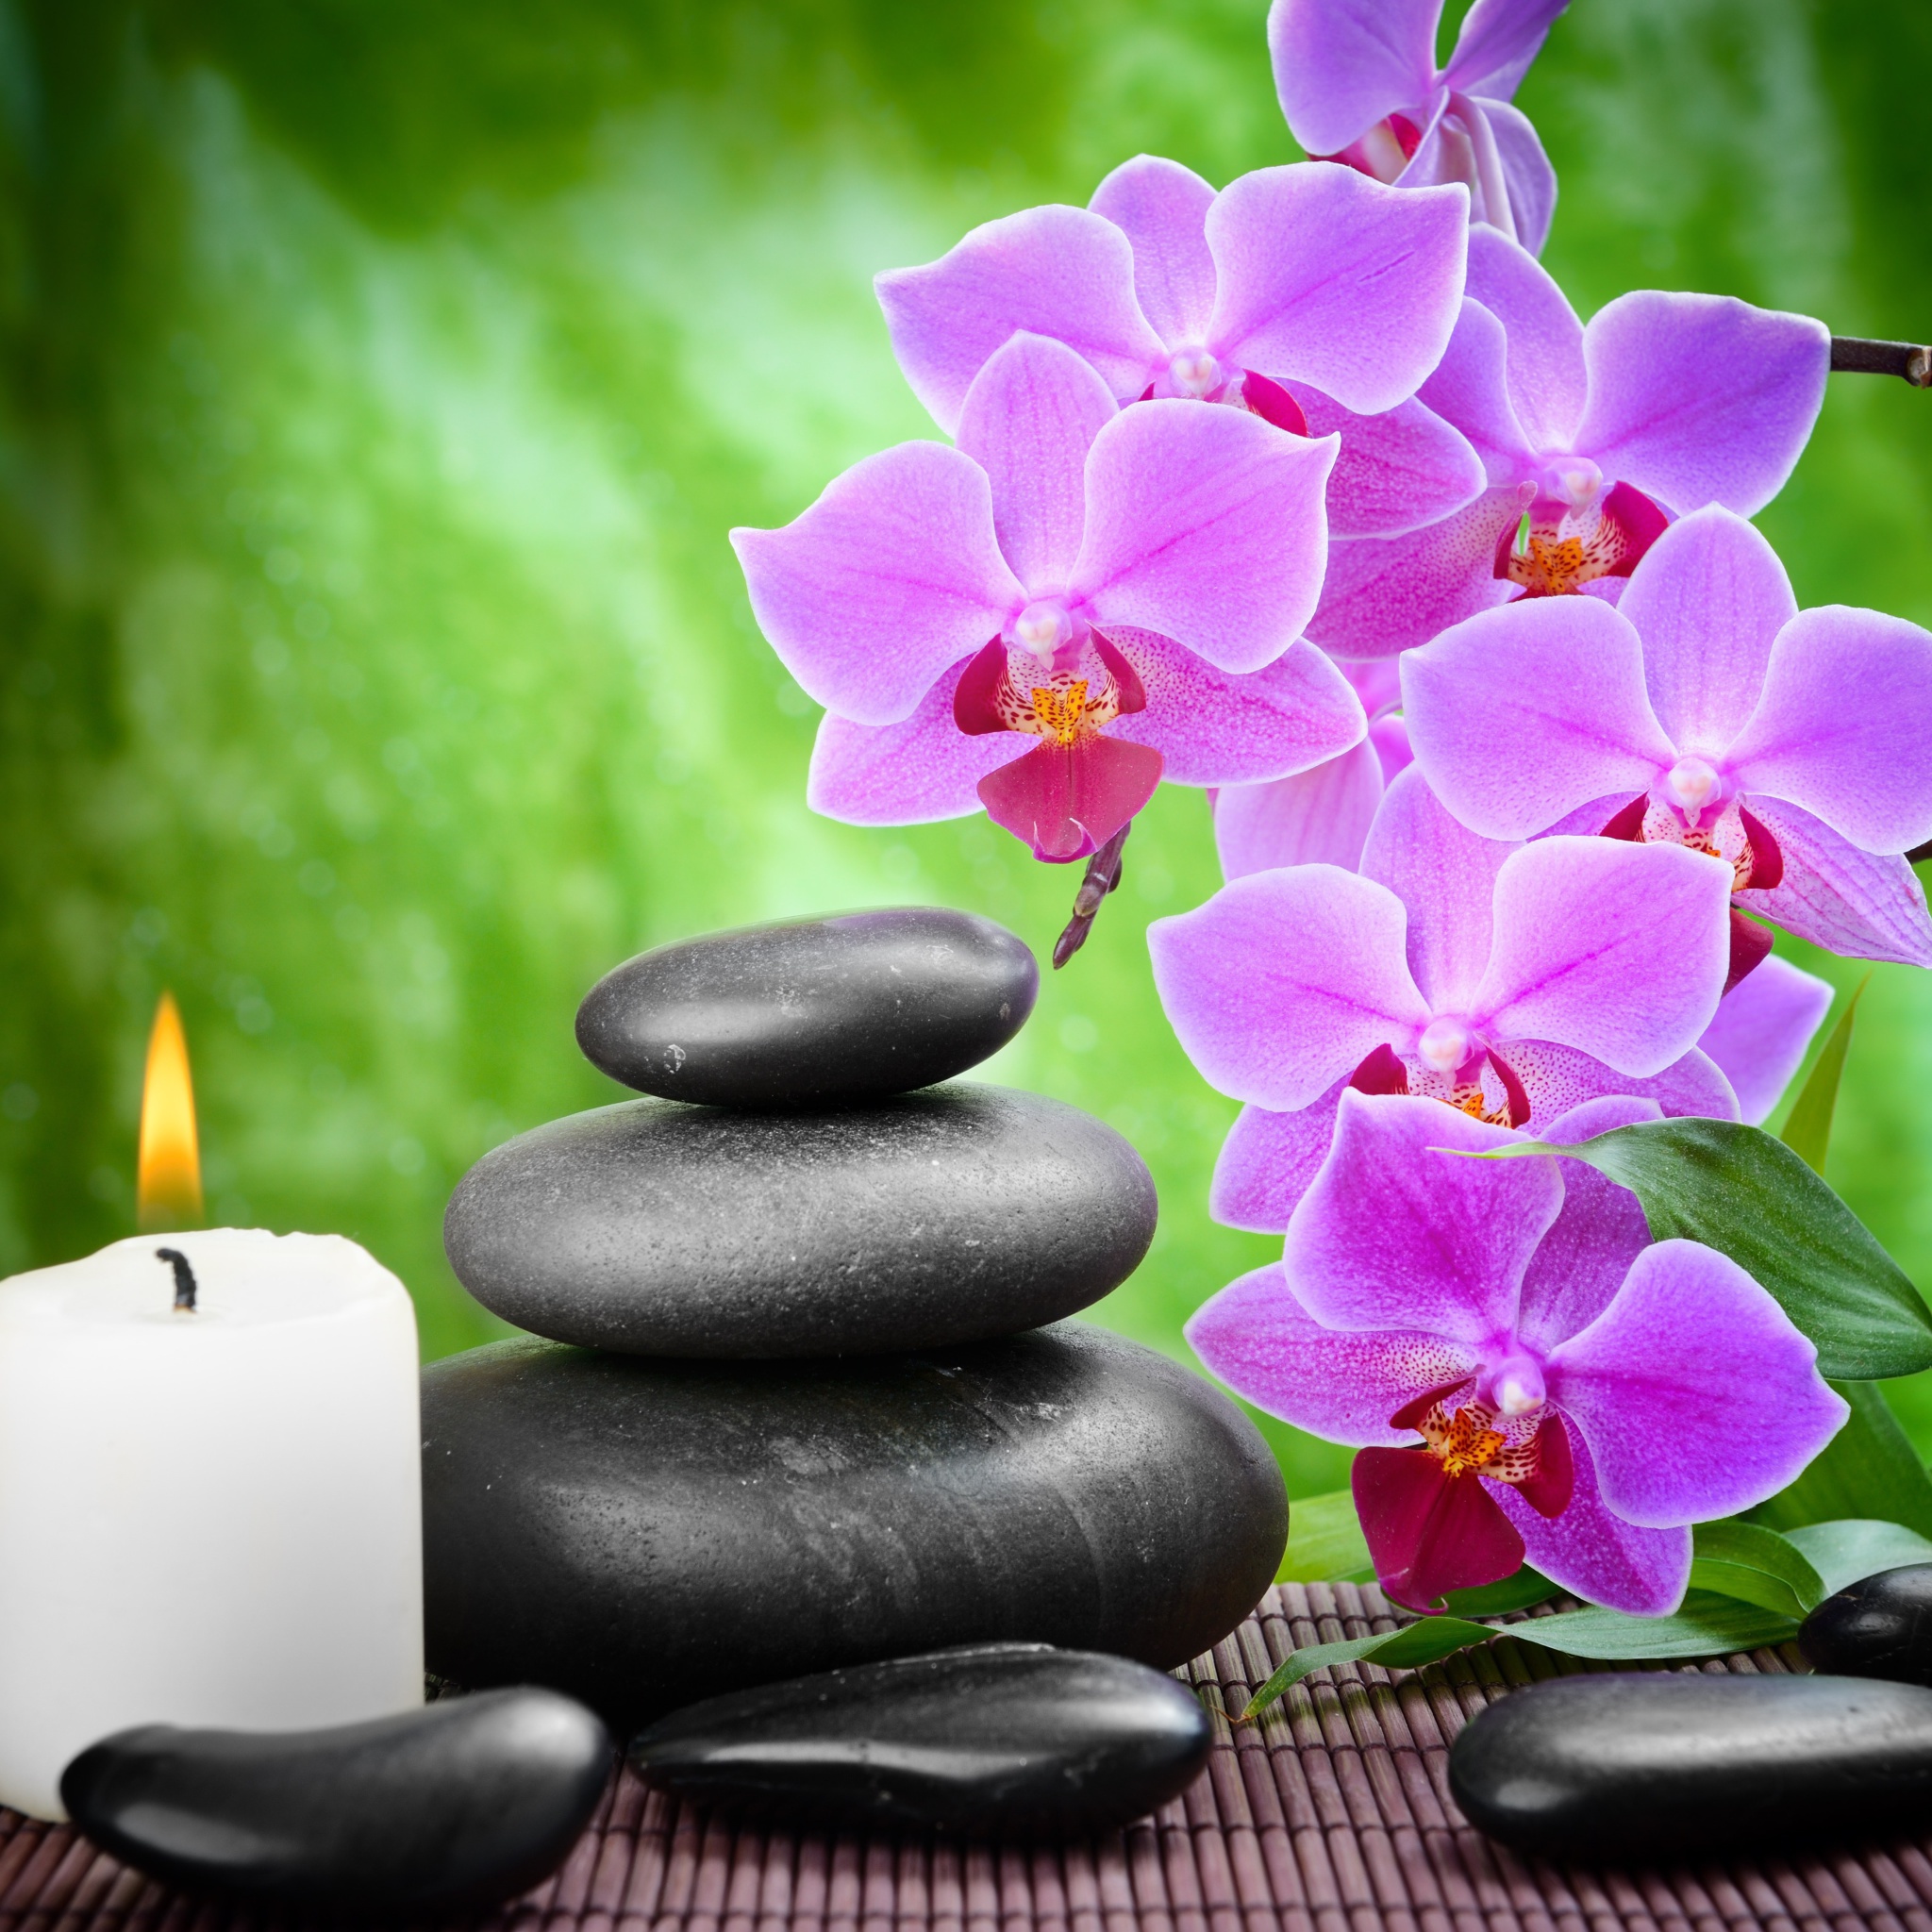 Pebbles, candles and orchids screenshot #1 2048x2048